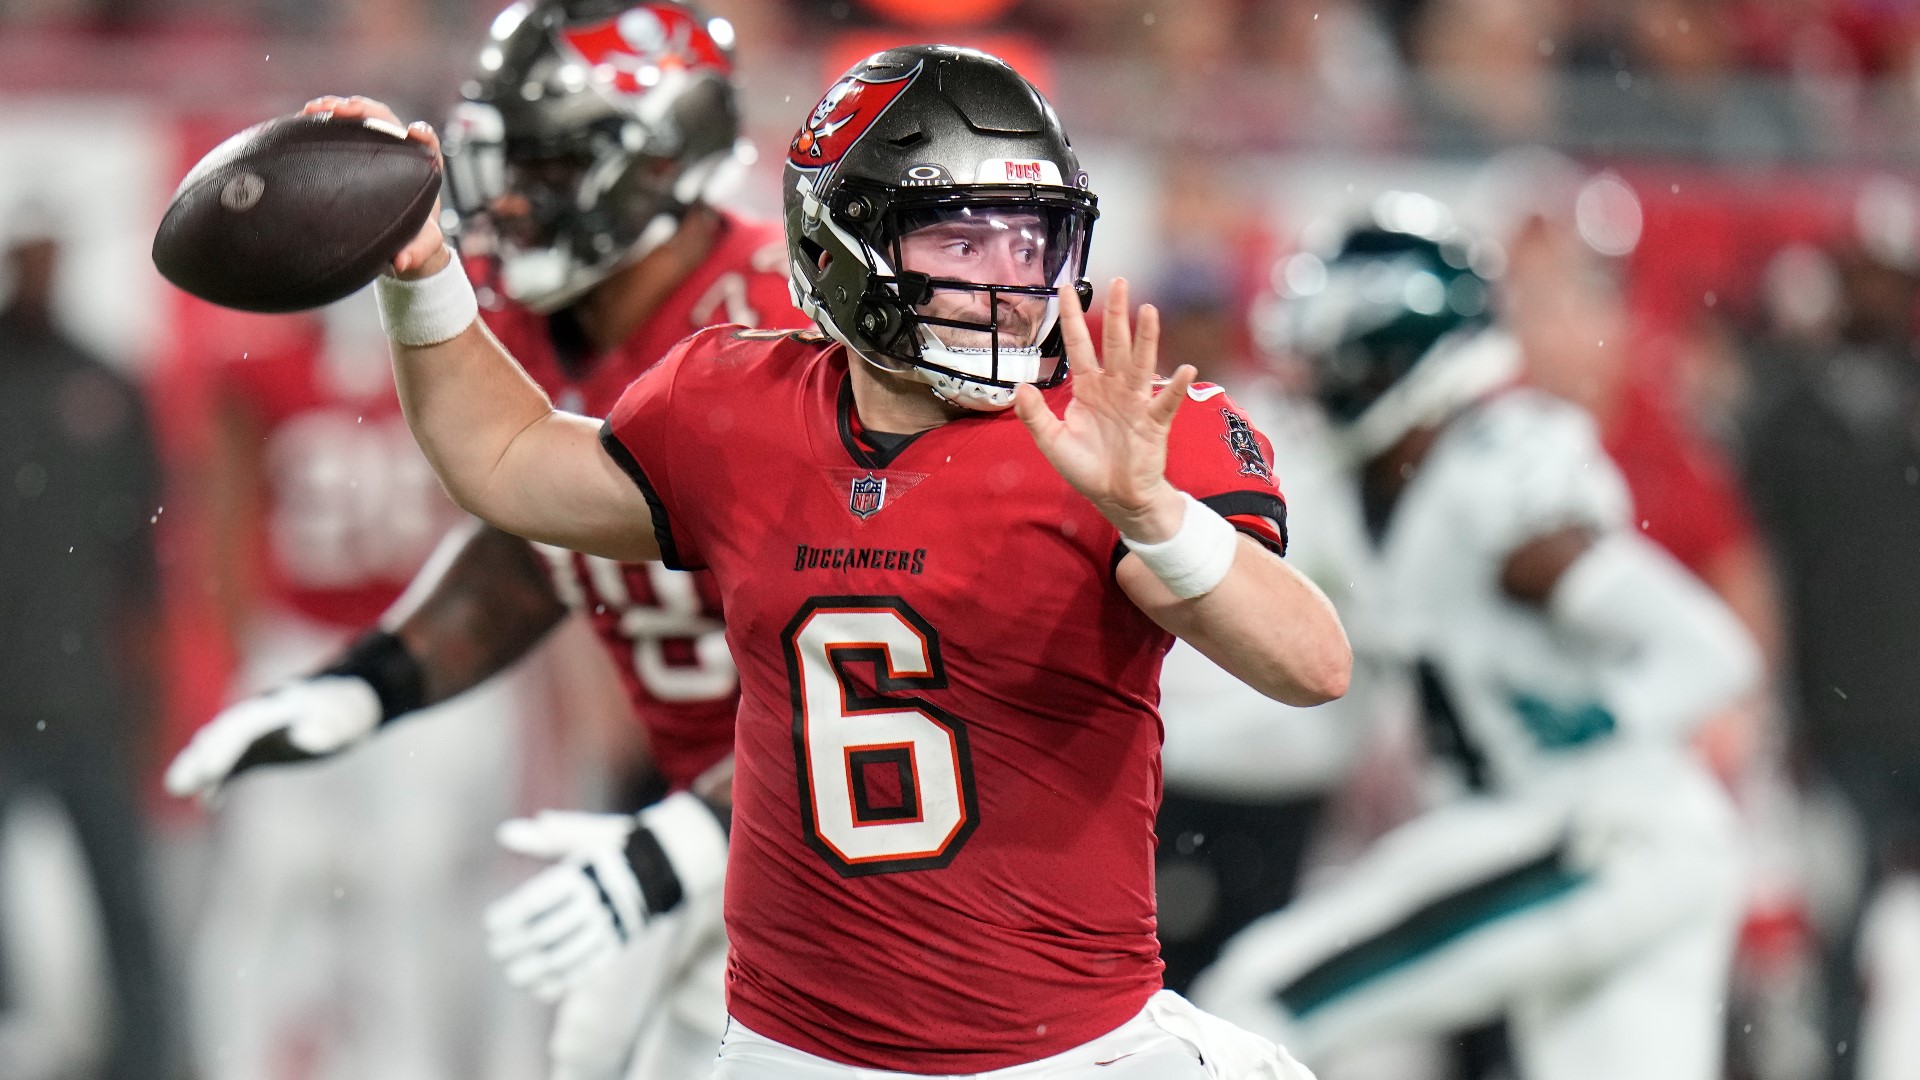 The Buccaneers fell to the Philadelphia Eagles, 25-11, on Monday Night Football.